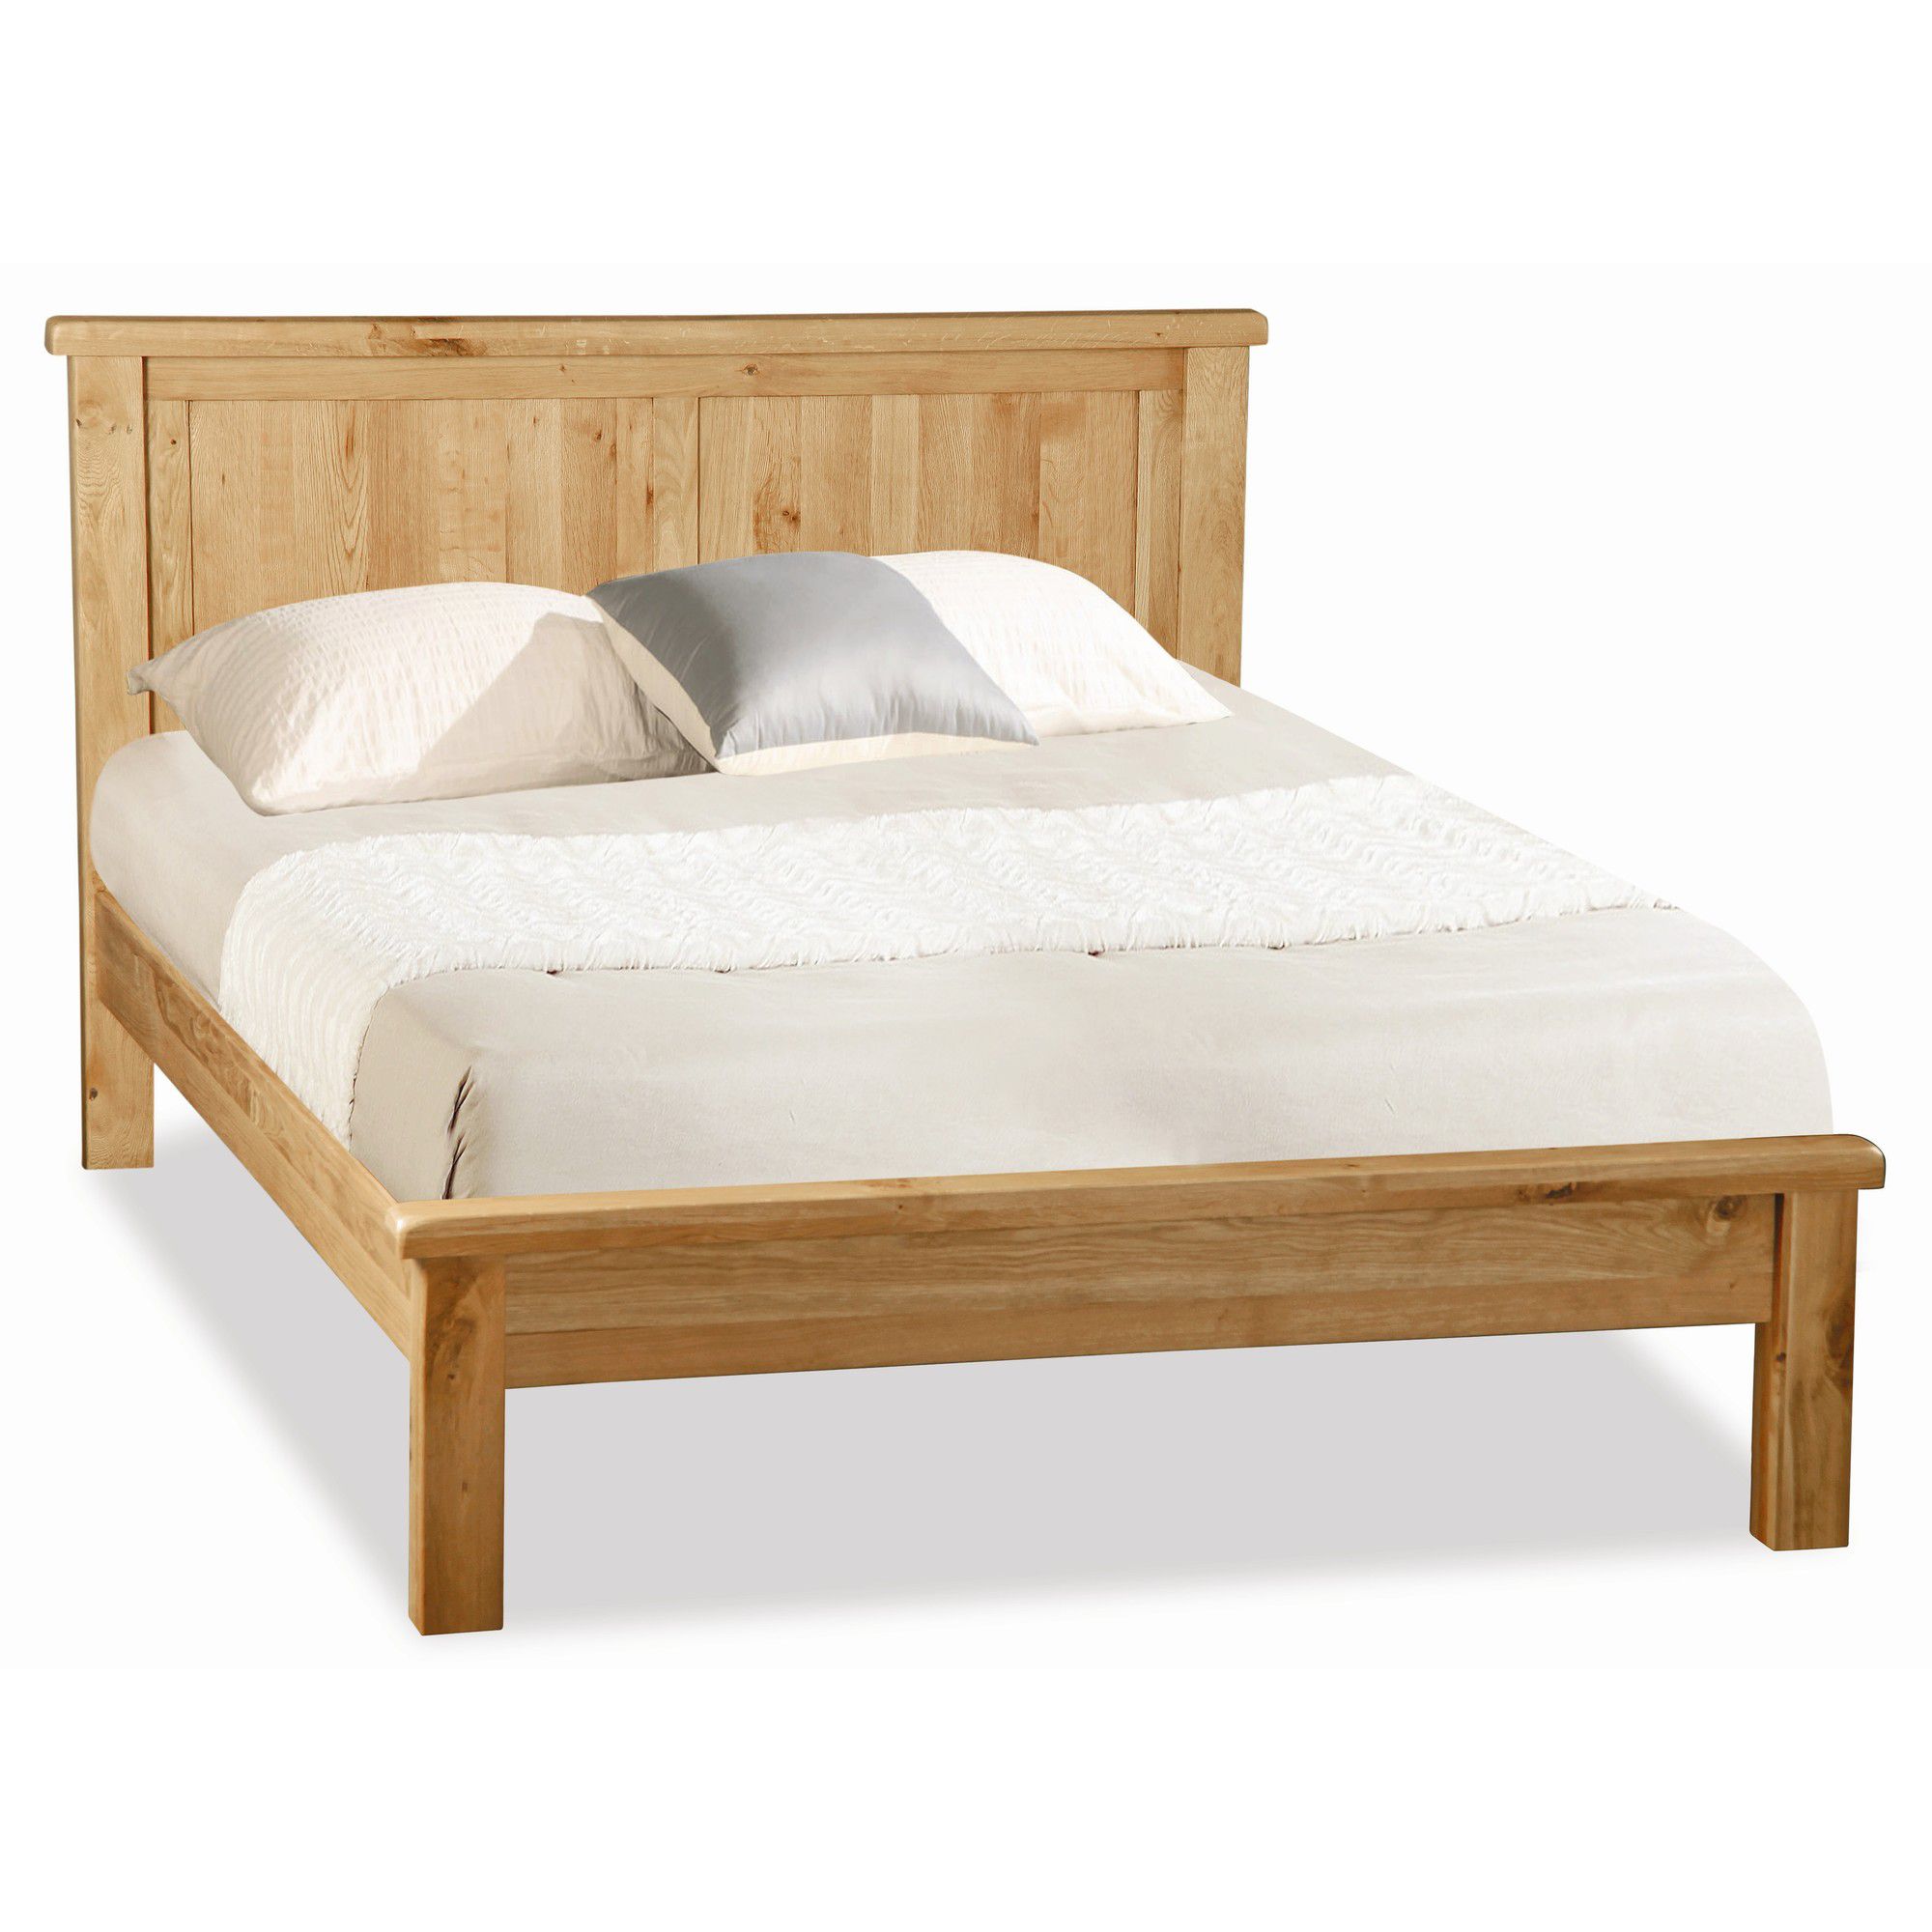 Alterton Furniture Pemberley Panelled Bed - Double at Tesco Direct